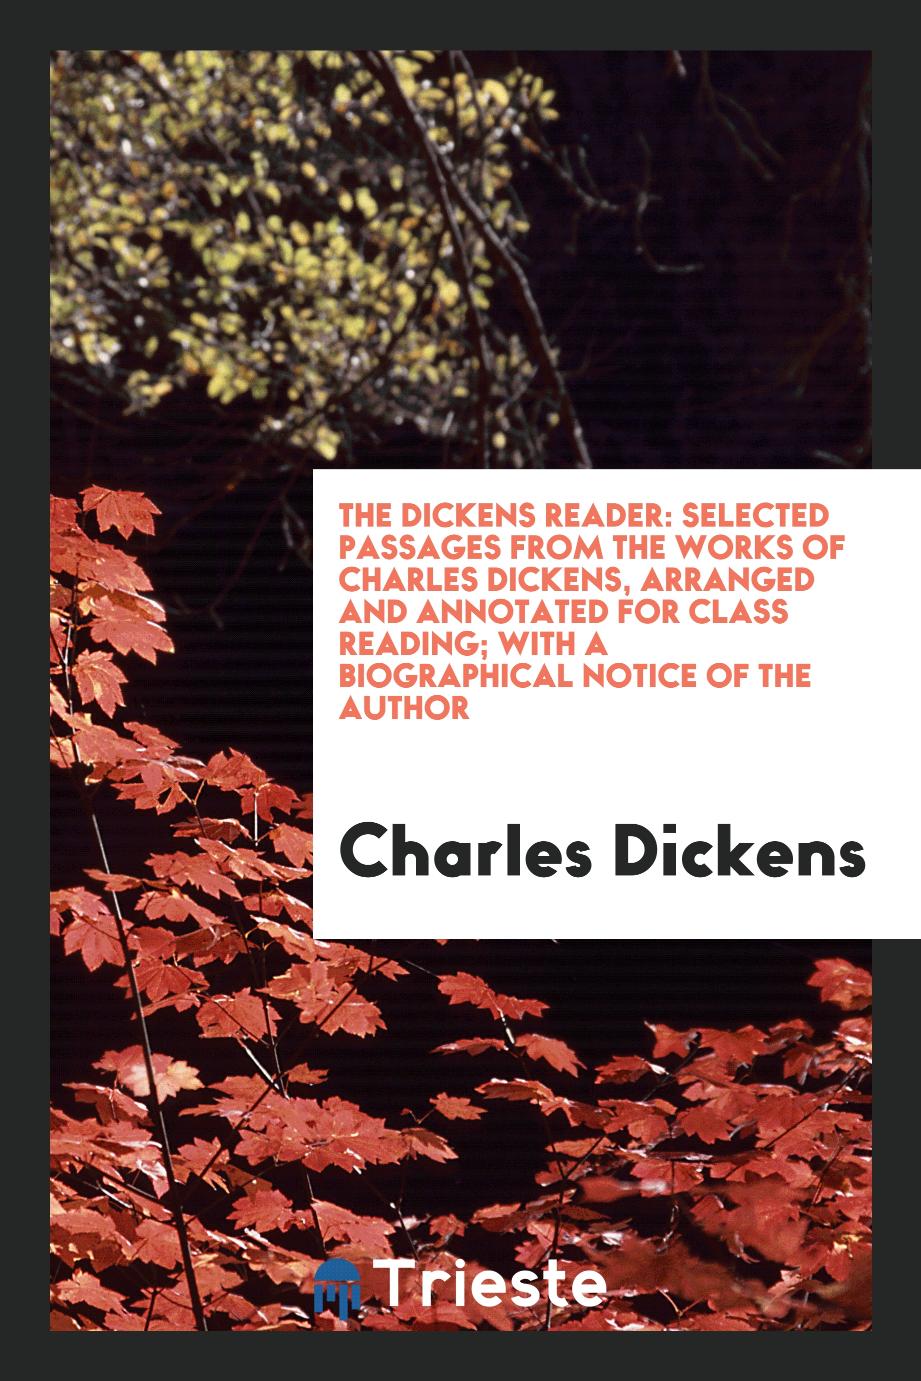 The Dickens Reader: Selected Passages from the Works of Charles Dickens, Arranged and Annotated for Class Reading; With a Biographical Notice of the Author